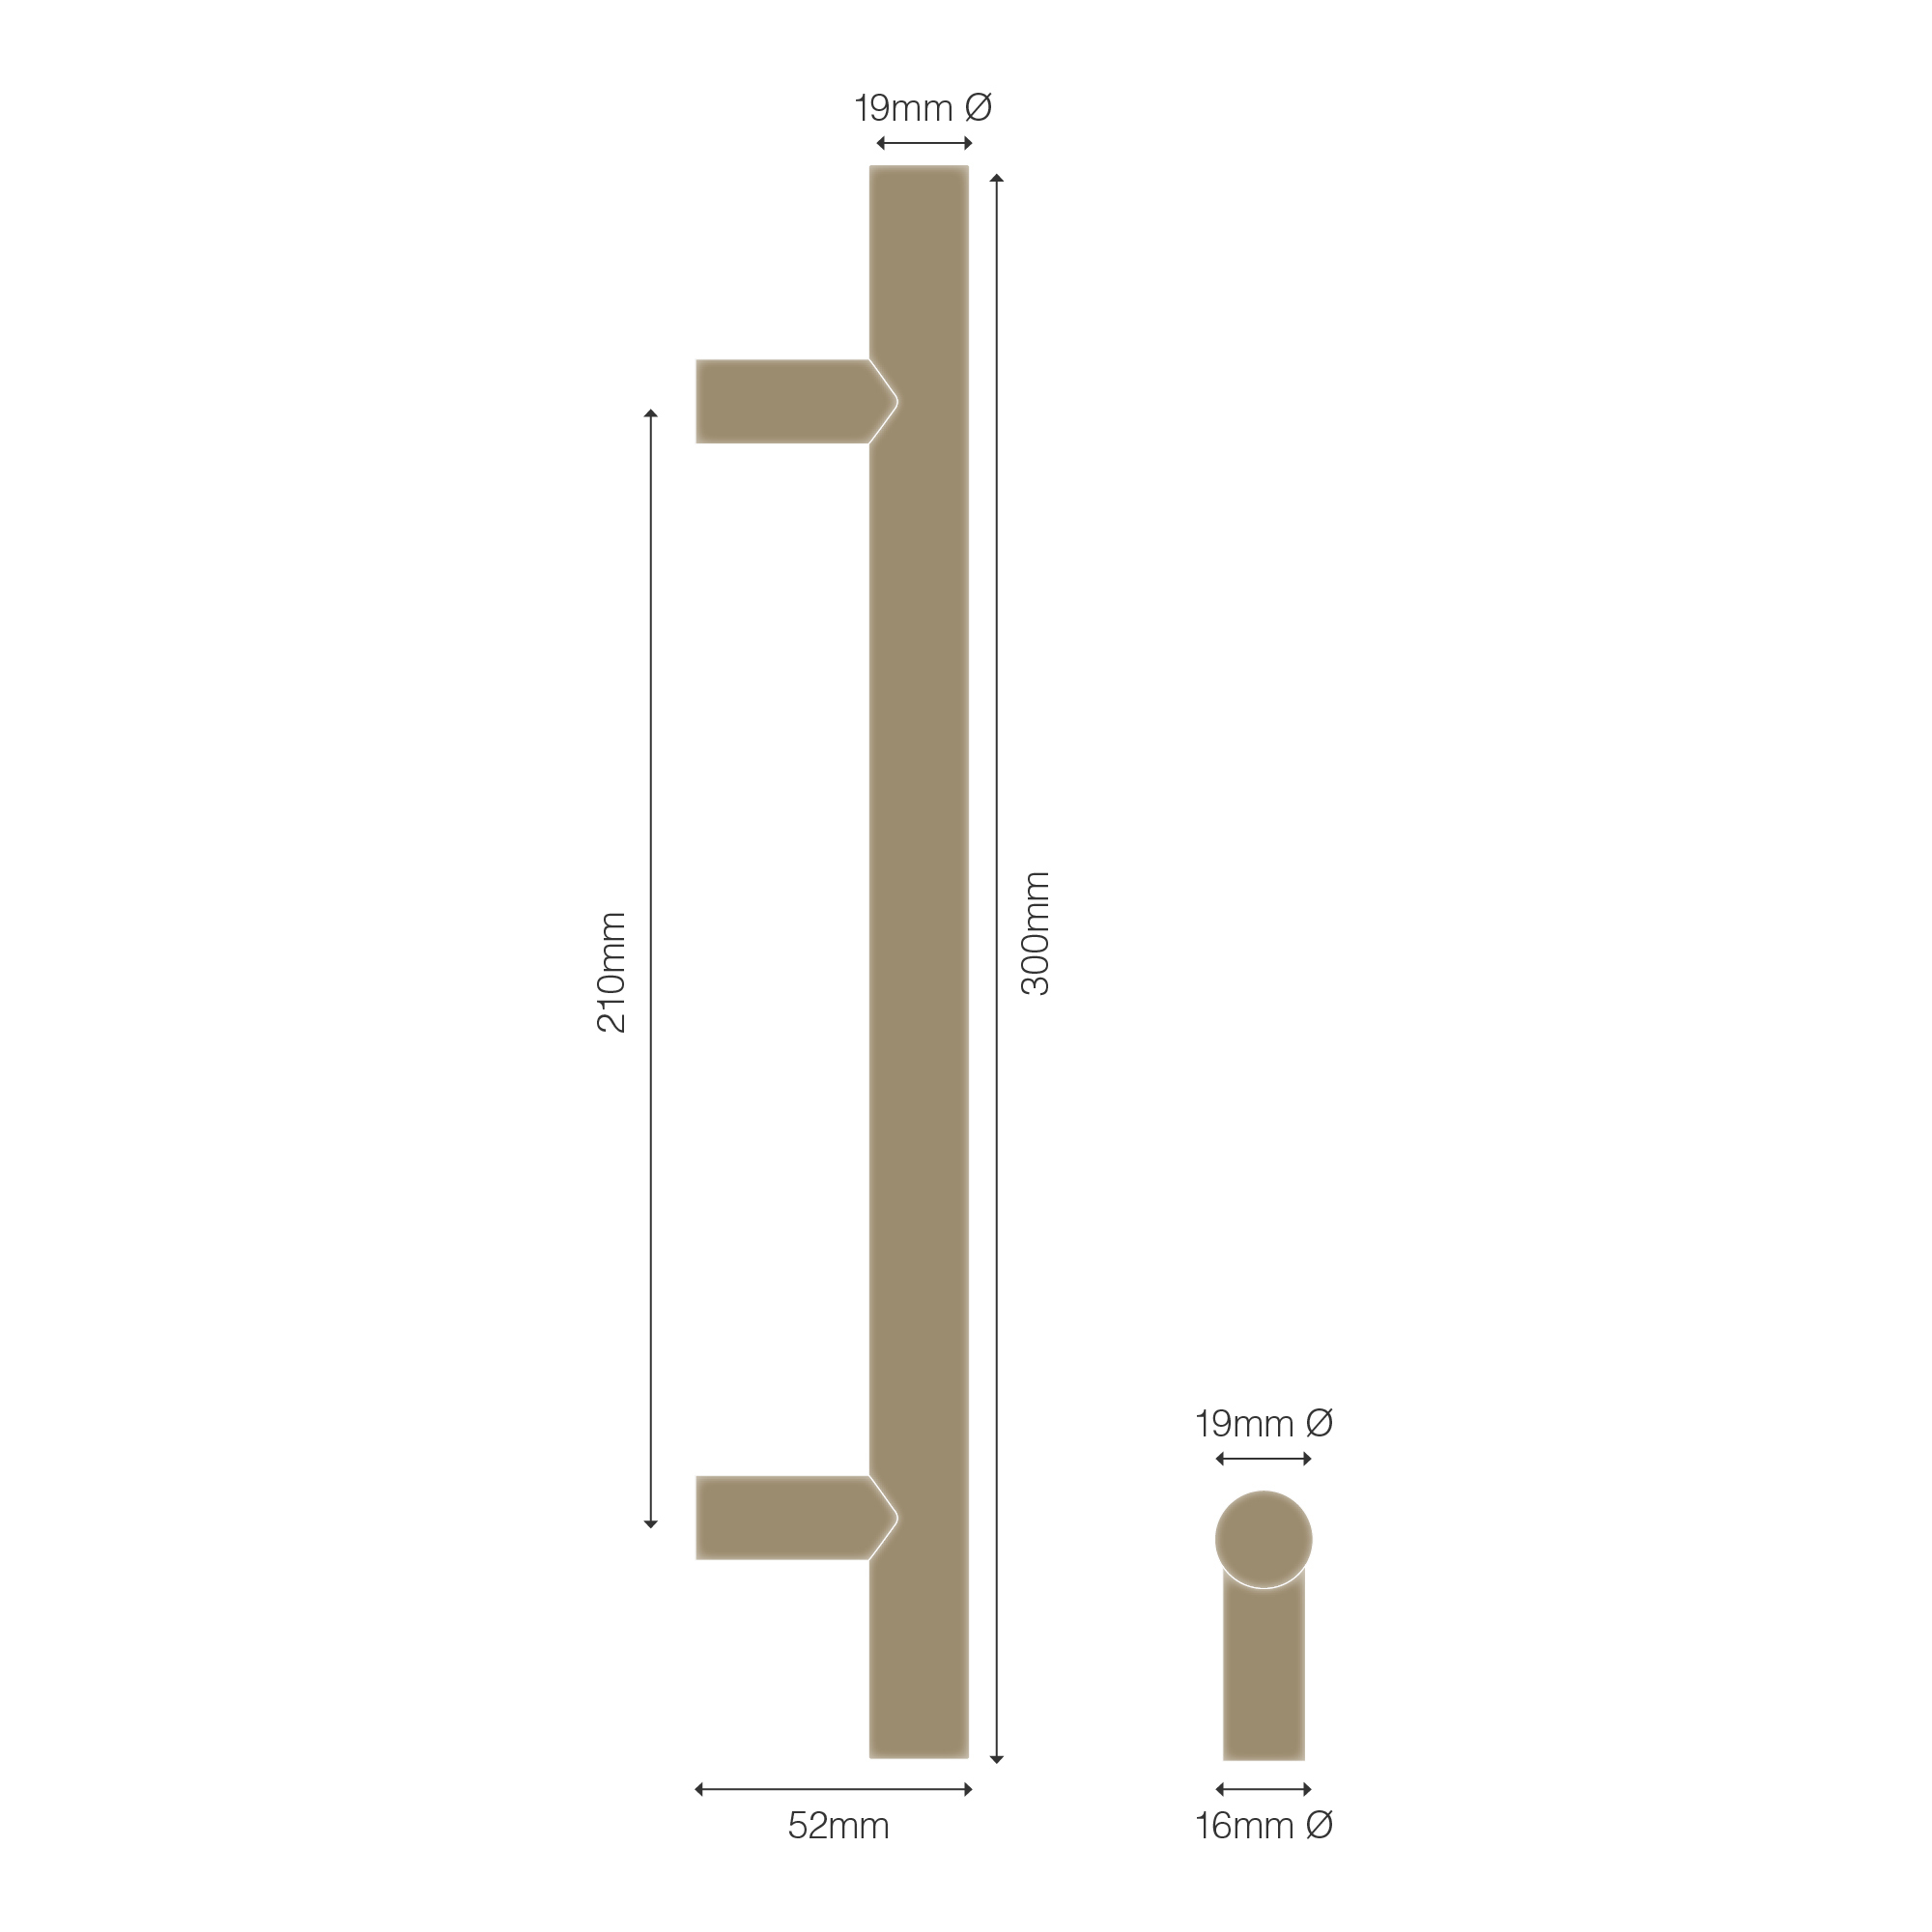 Solid Brass Round Pull Handle 300mm Product Dimensions 2000x2000px